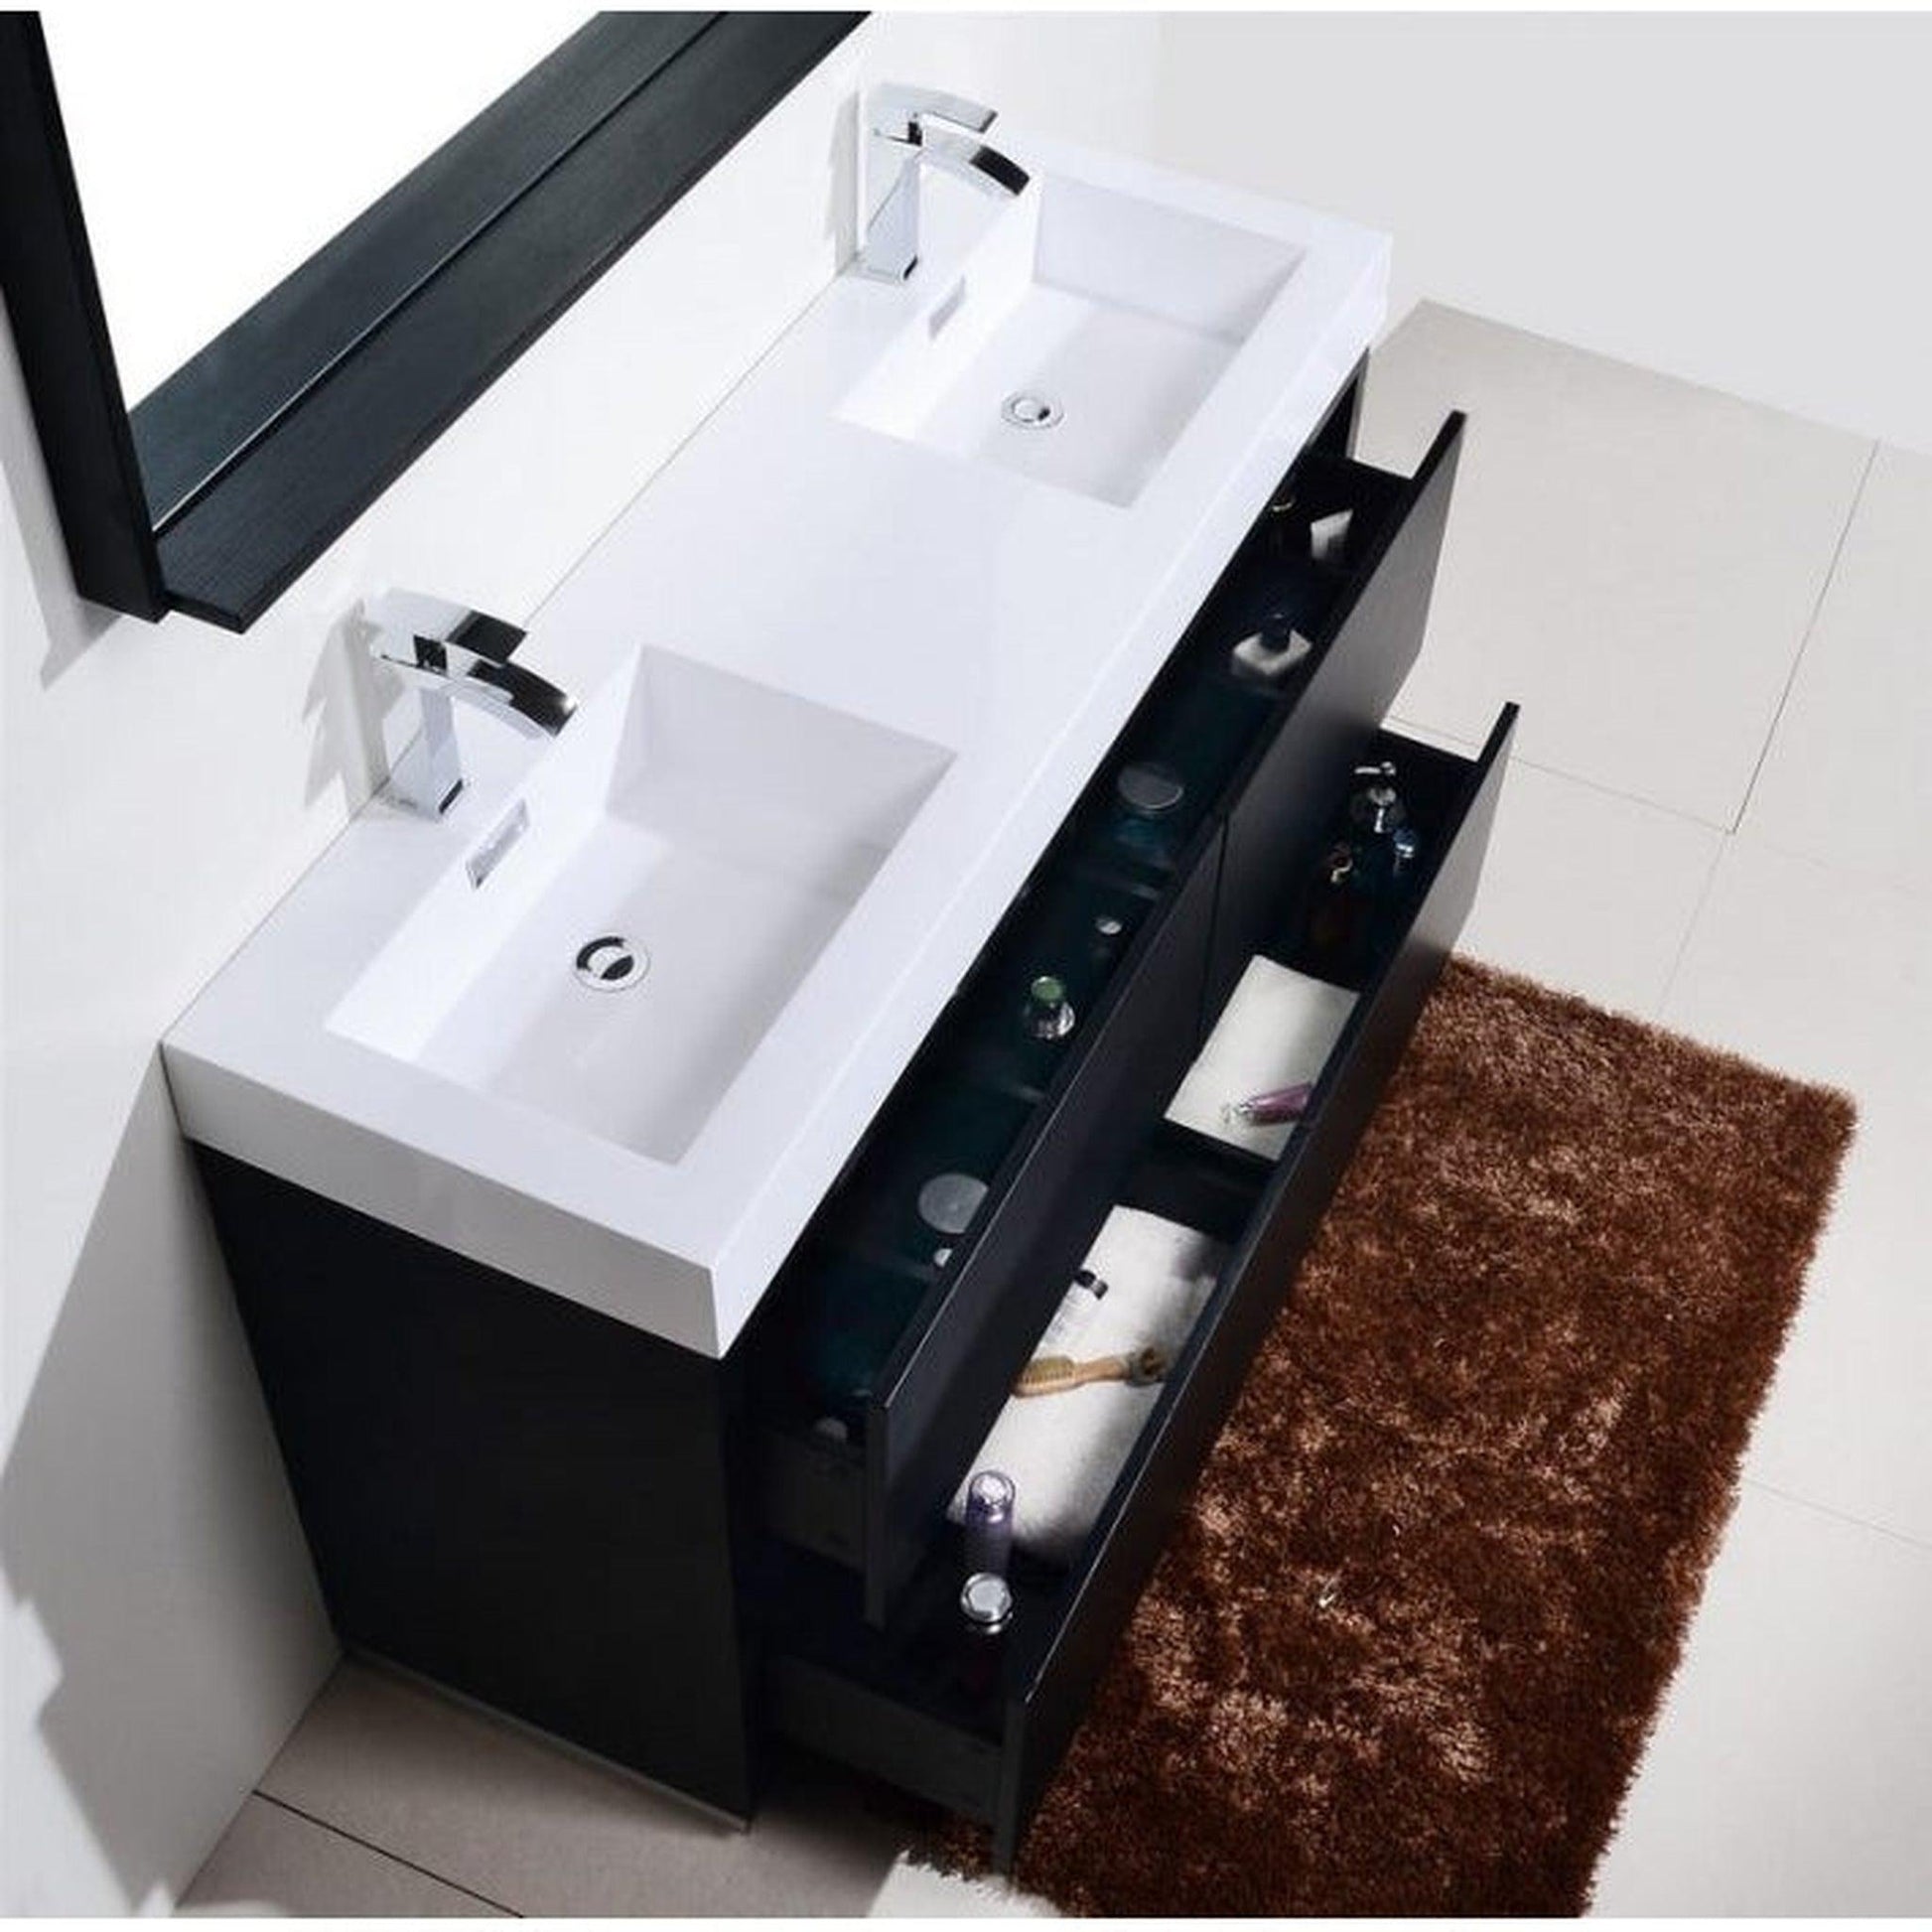 KubeBath Bliss 60" Black Freestanding Modern Bathroom Vanity With Double Integrated Acrylic Sink With Overflow and 55" Black Framed Mirror With Shelf